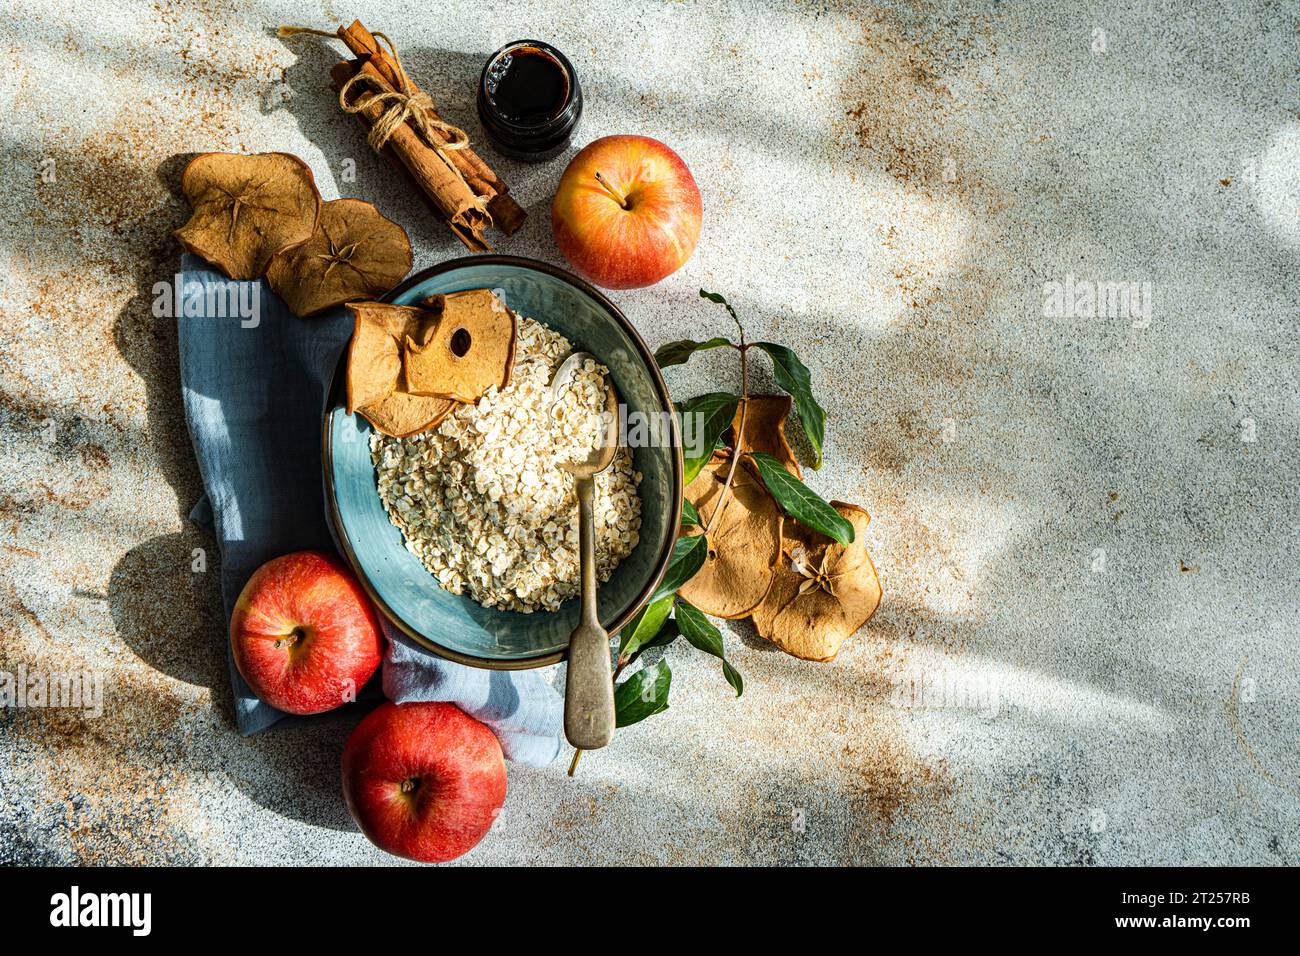 Raw oats and apples in the bowl Stock Photo